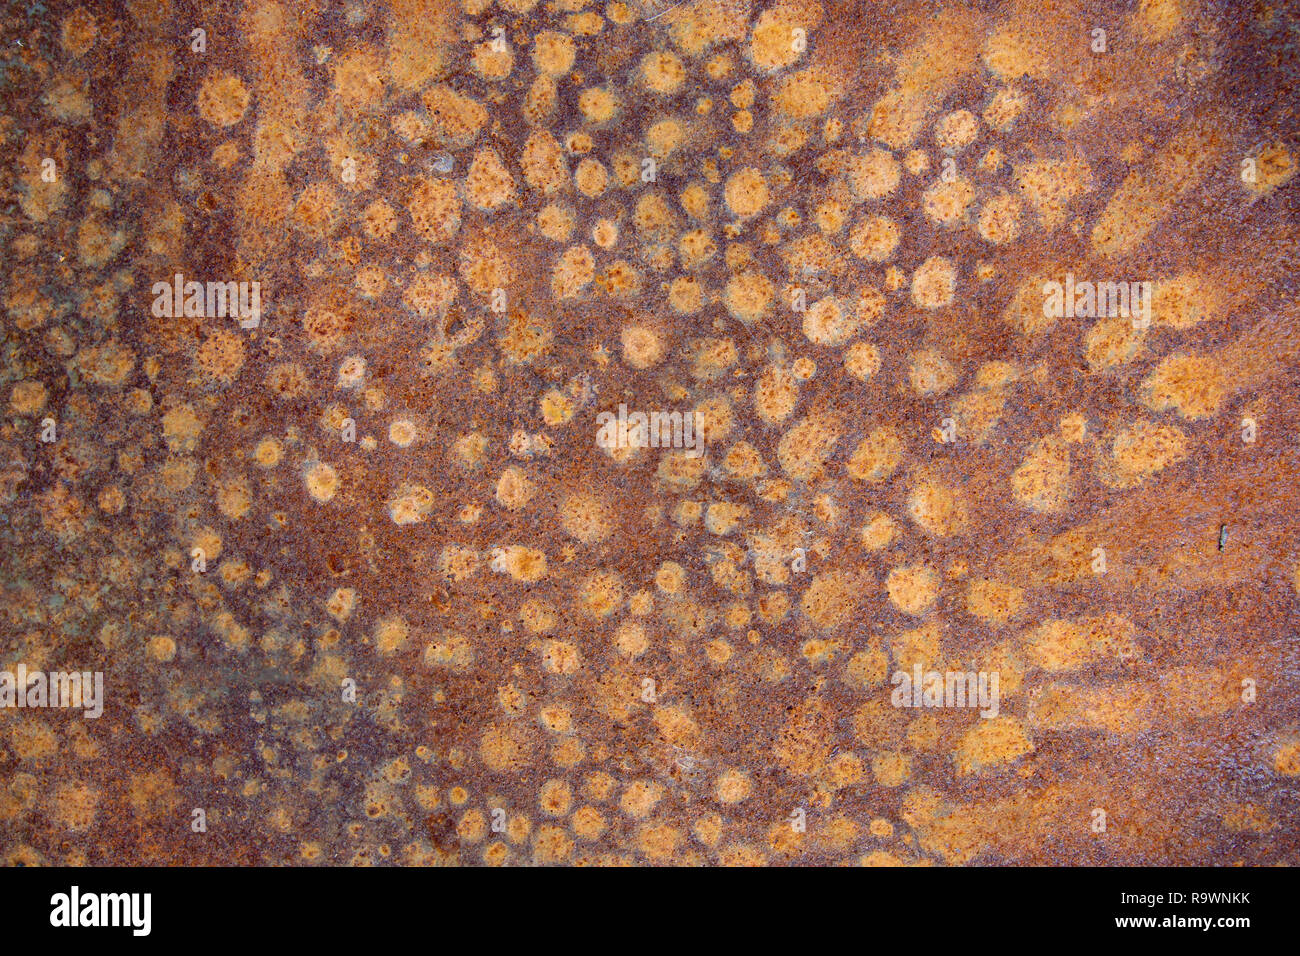 Detail of the rust stains on the metal surface Stock Photo